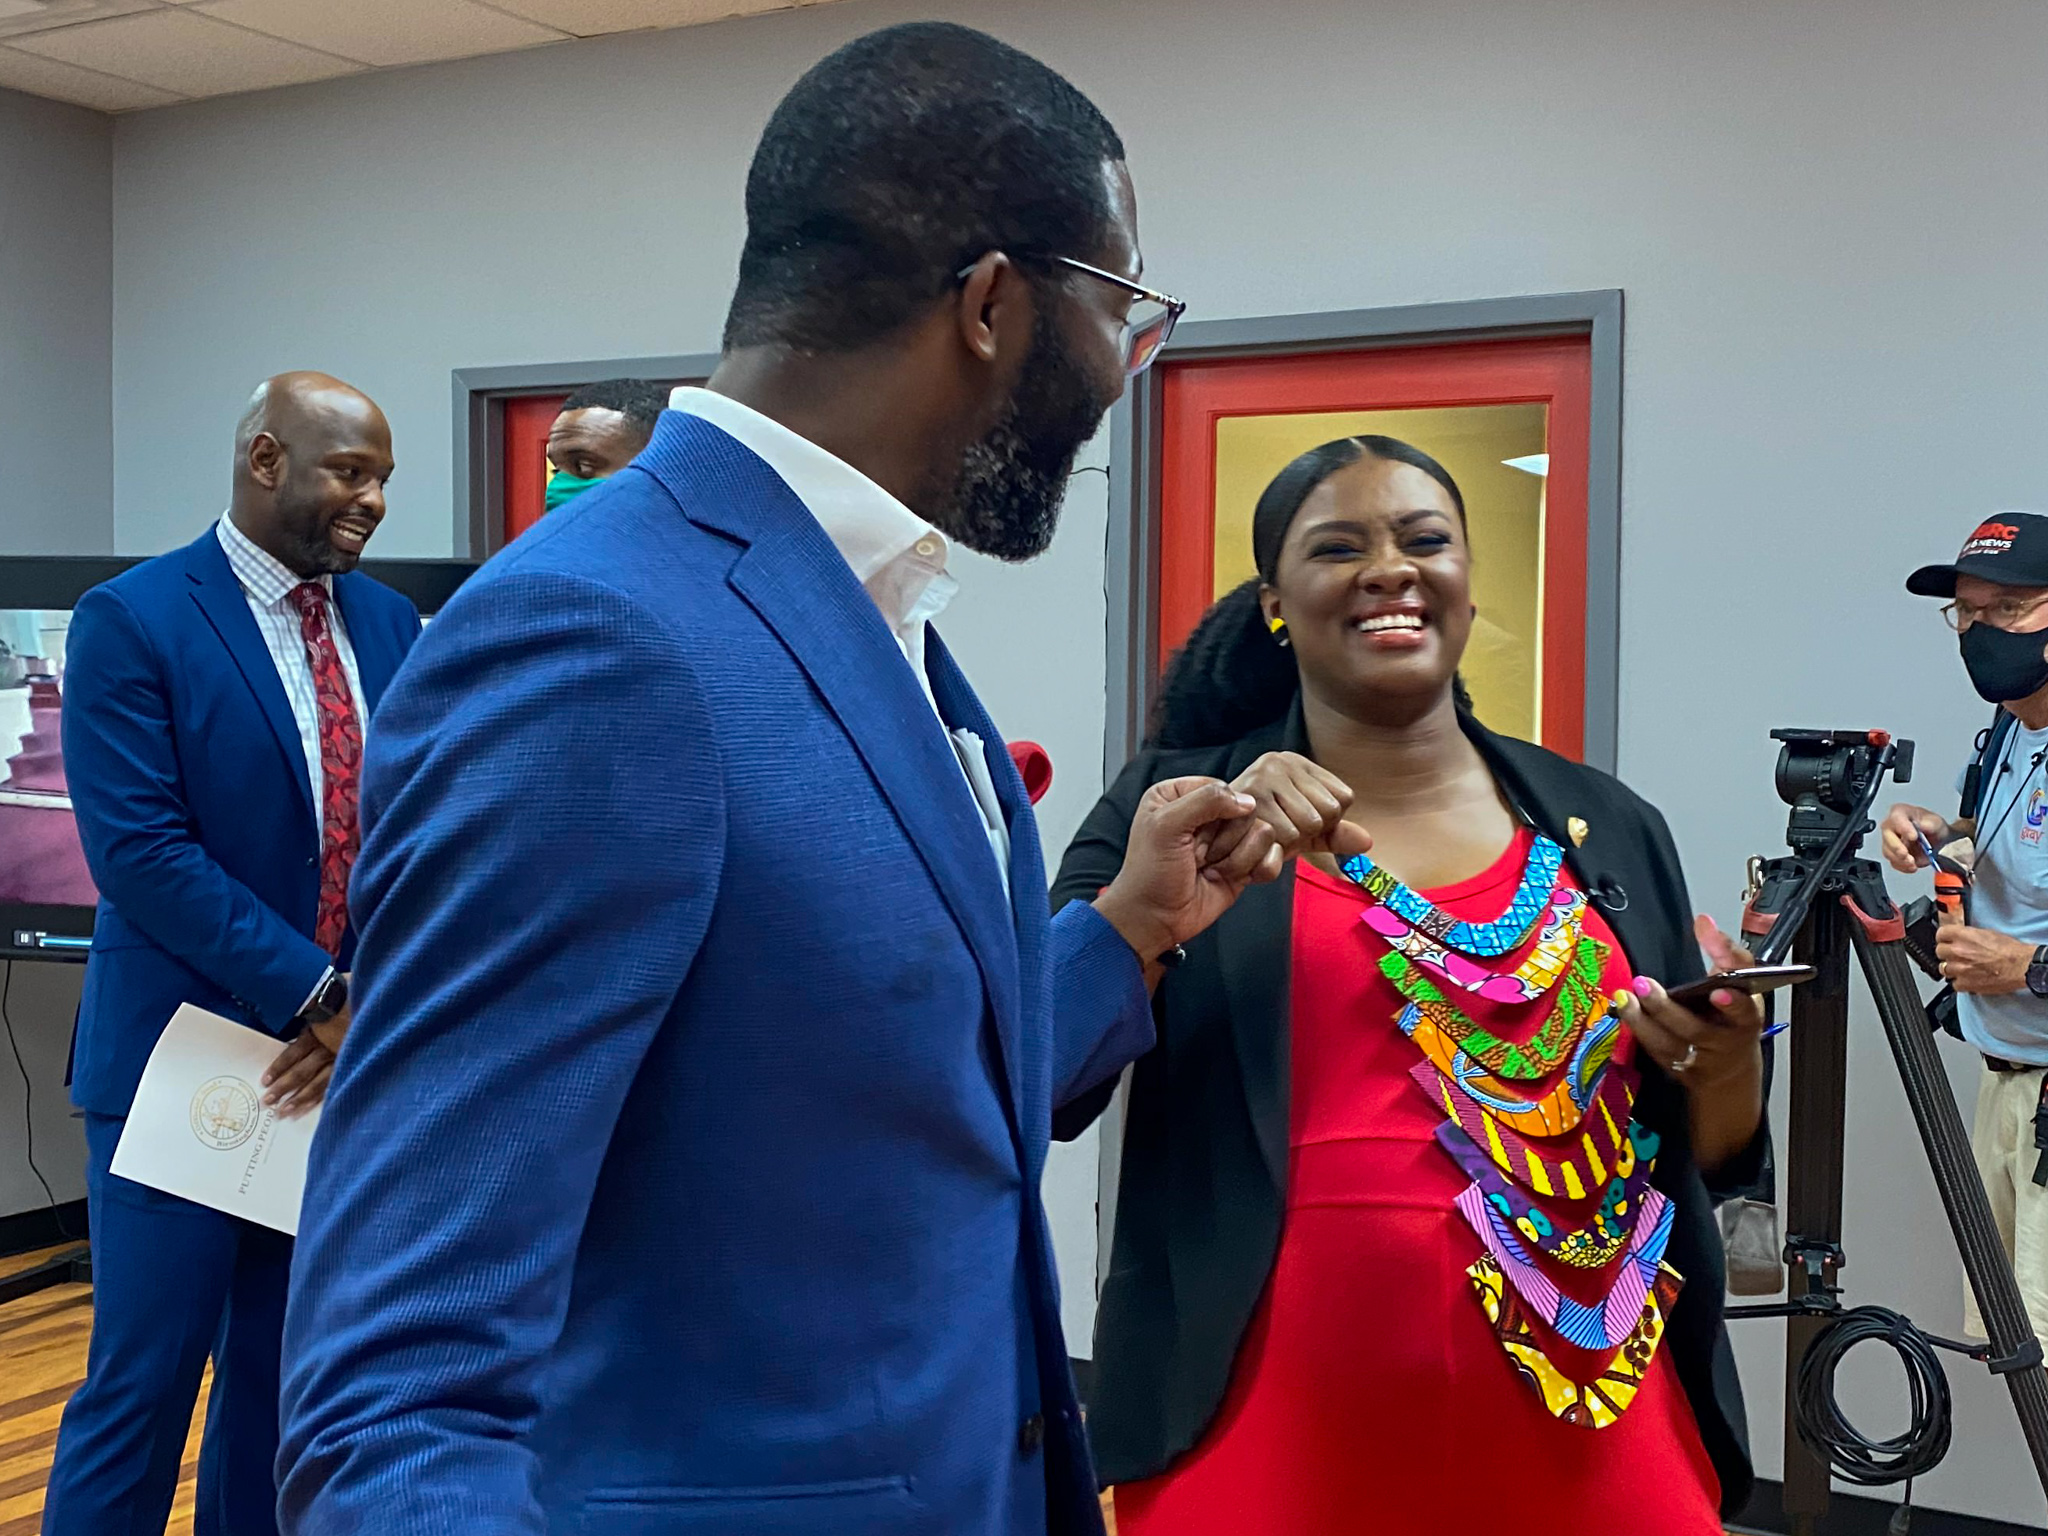 Mayor Woodfin fist bumps Ursula Smith, who will be featured in the Pricelesscampaign. Photo via Libby Foster for Bham Now